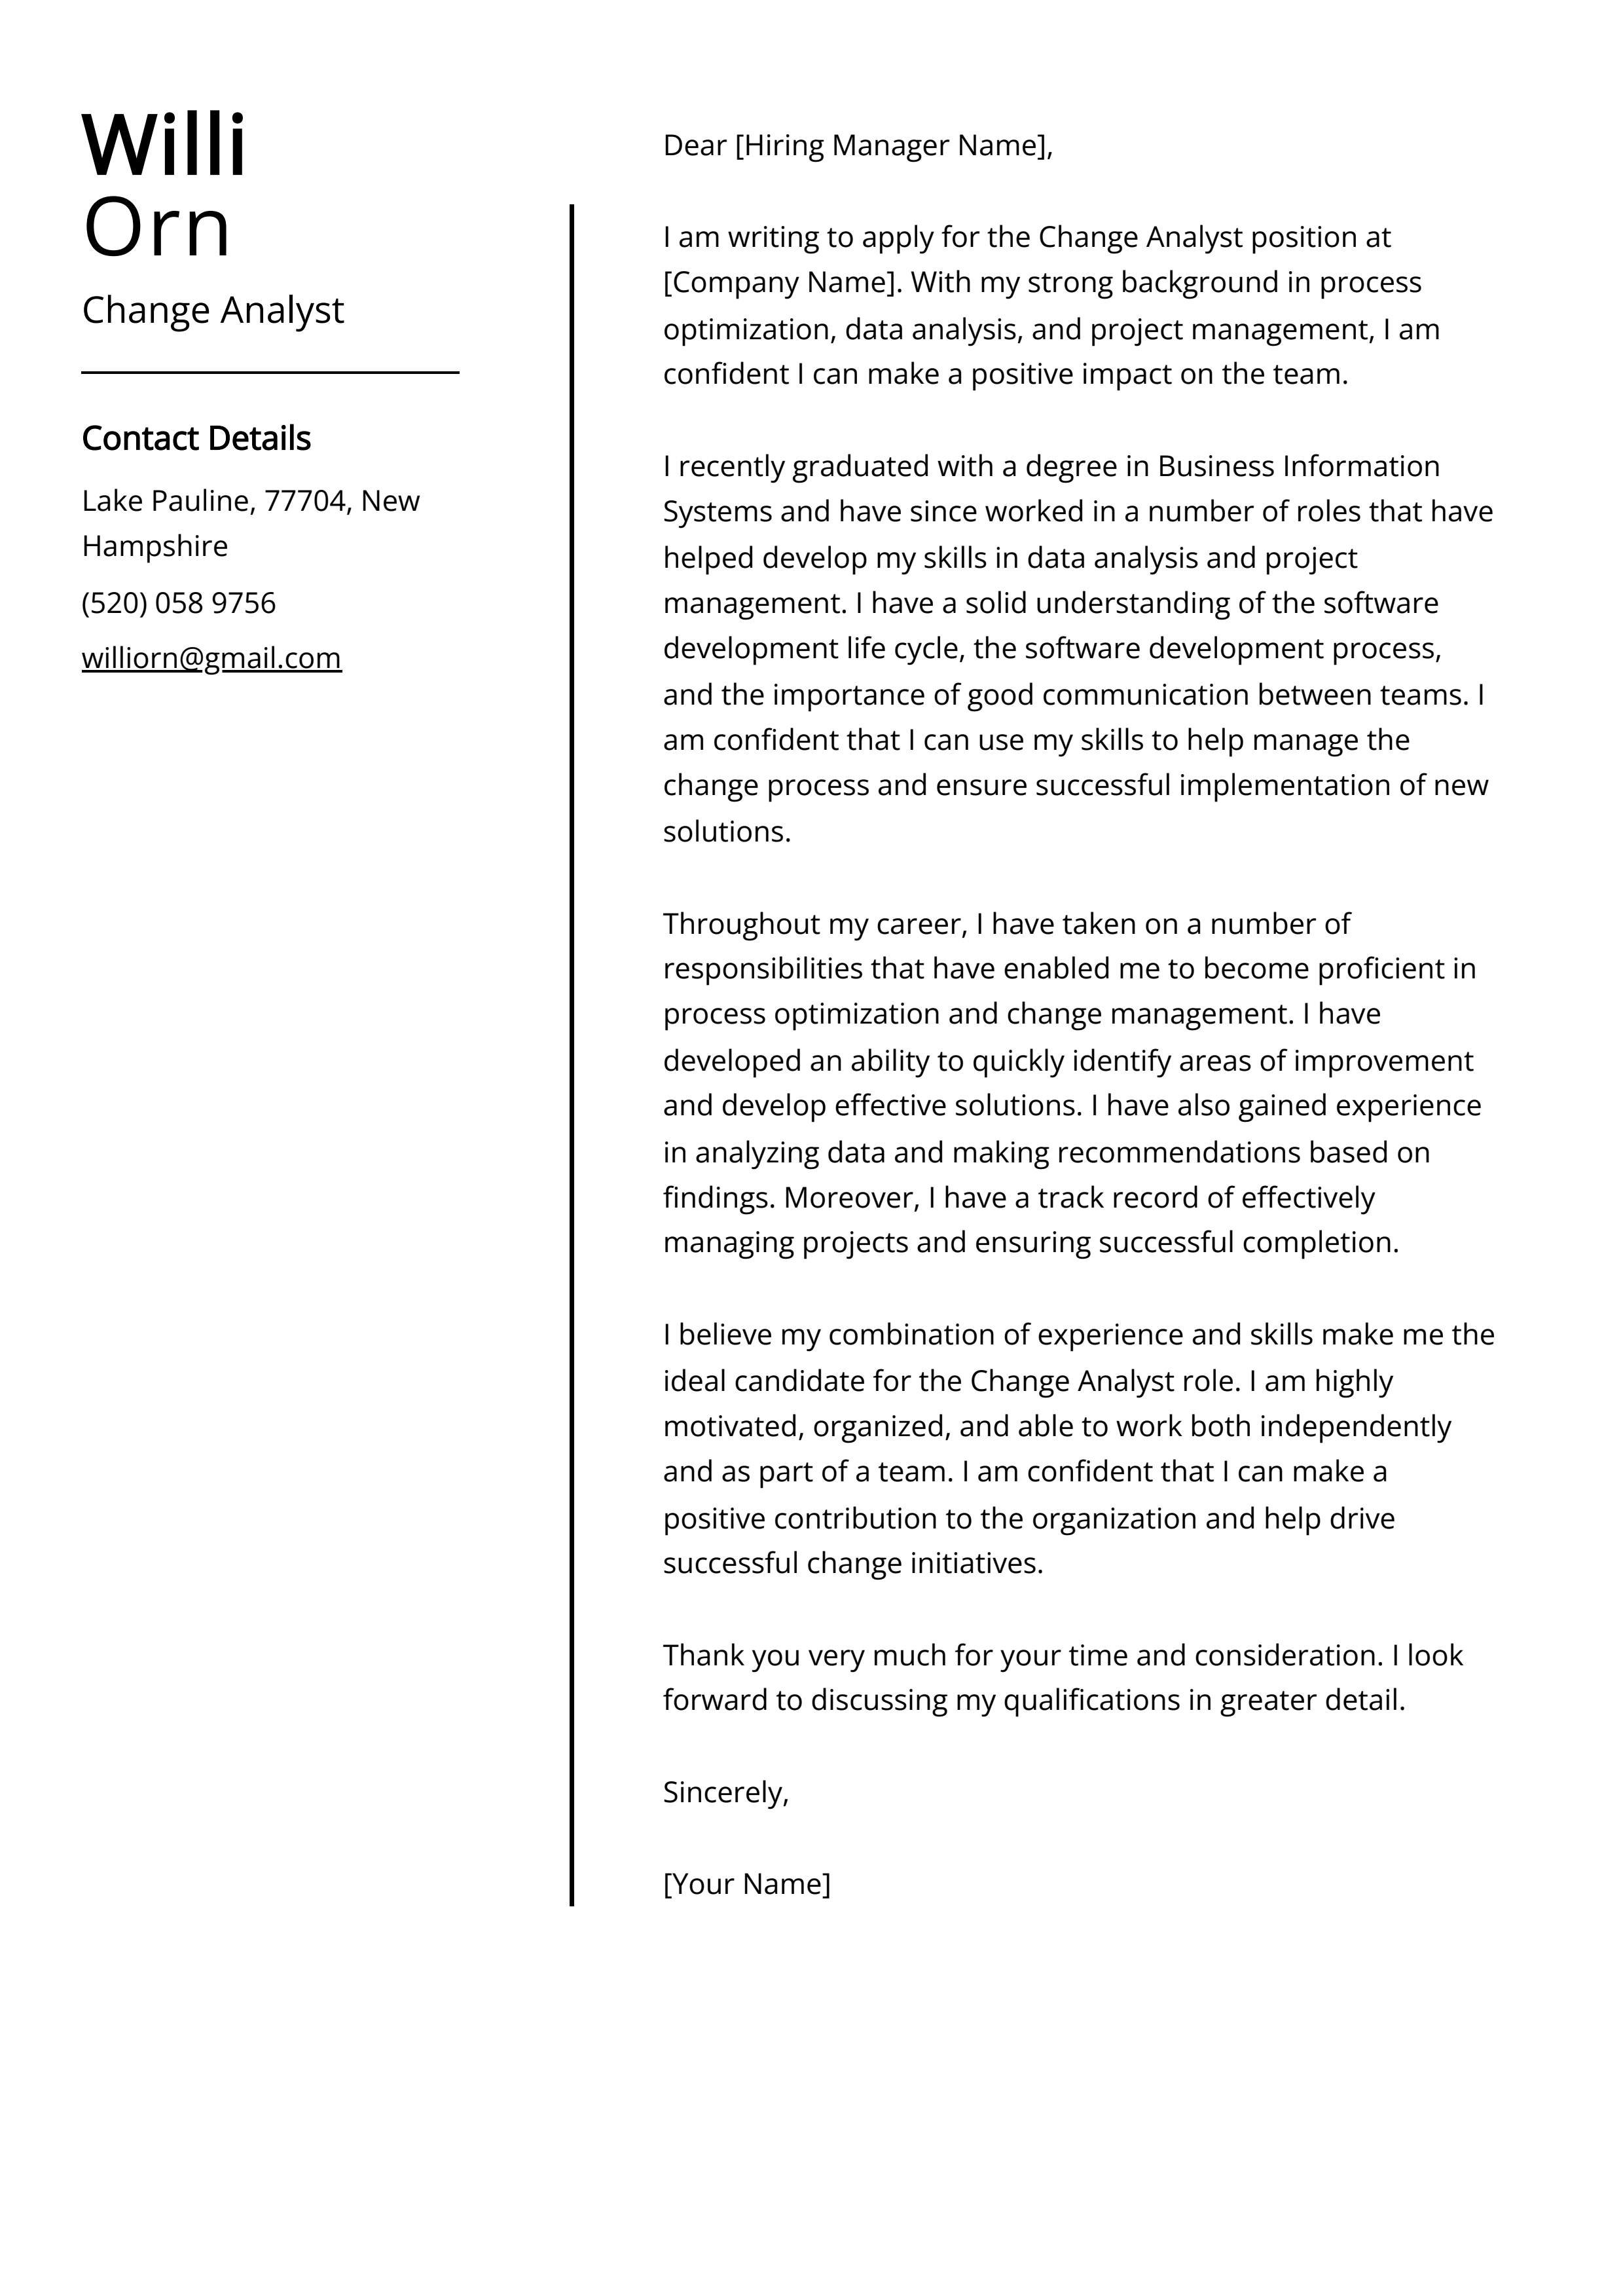 Change Analyst Cover Letter Example